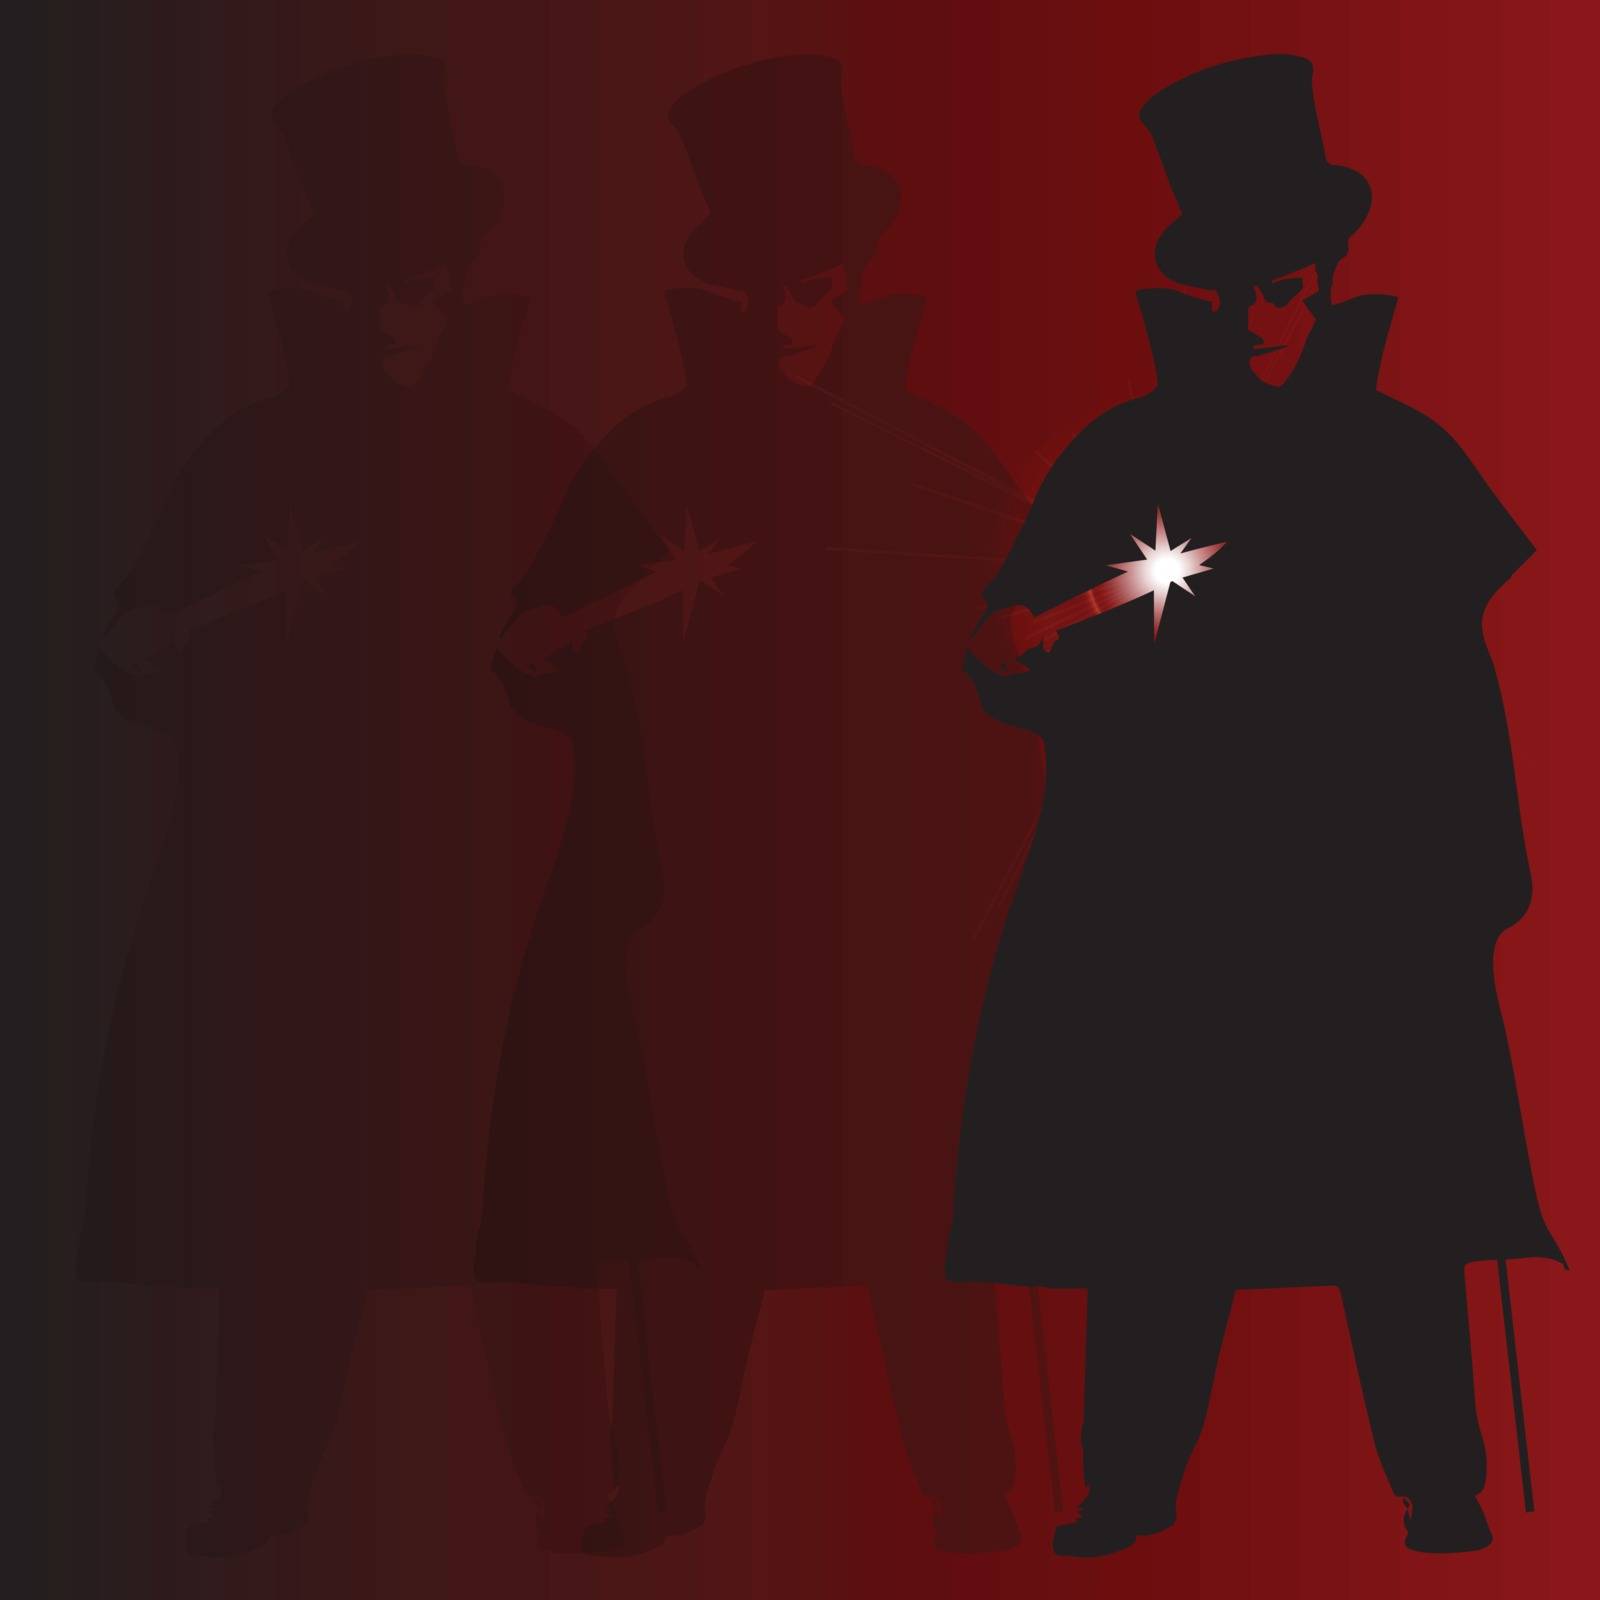 A Jack the Ripper background with shadows and silhouette over a red background